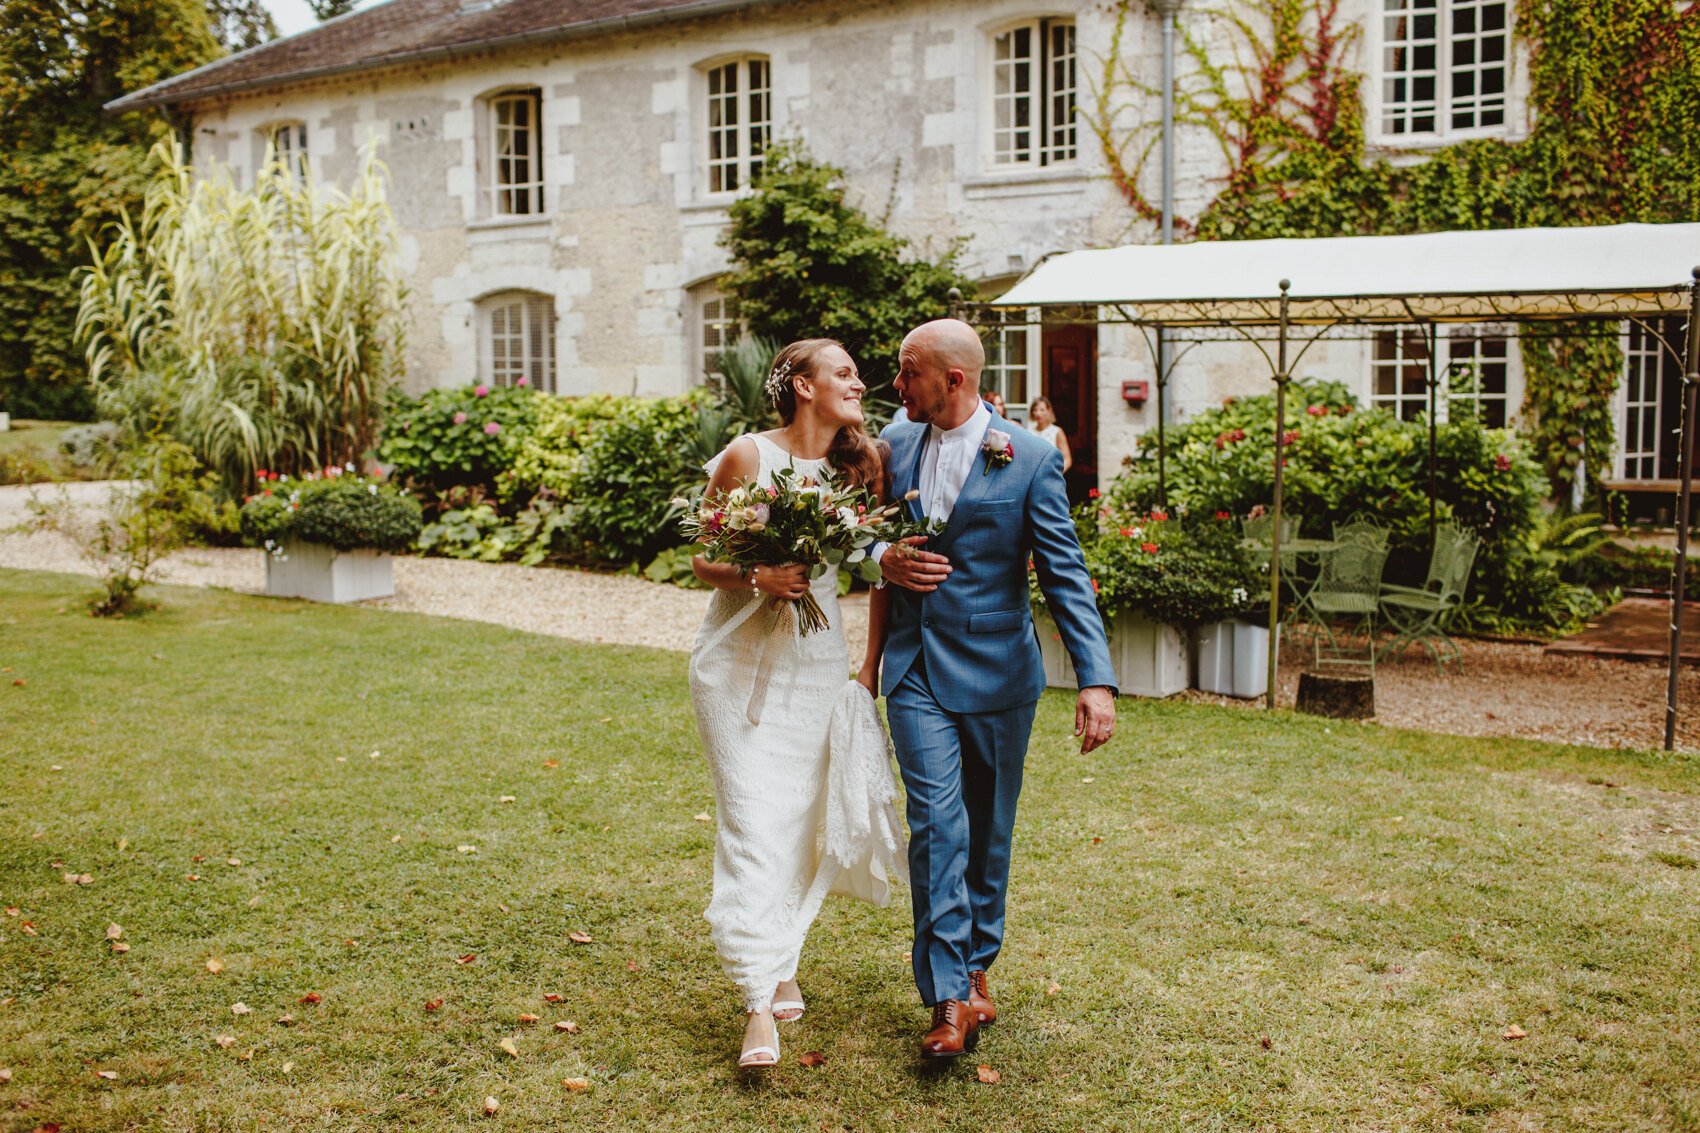  Your destination wedding is in France at Le Mas de Montet. Based in France, our professional photographer will discover the beauty of the Chateau Le de Montet and its gardens to photograph your unique wedding day.Destination Wedding and Intimate Pho